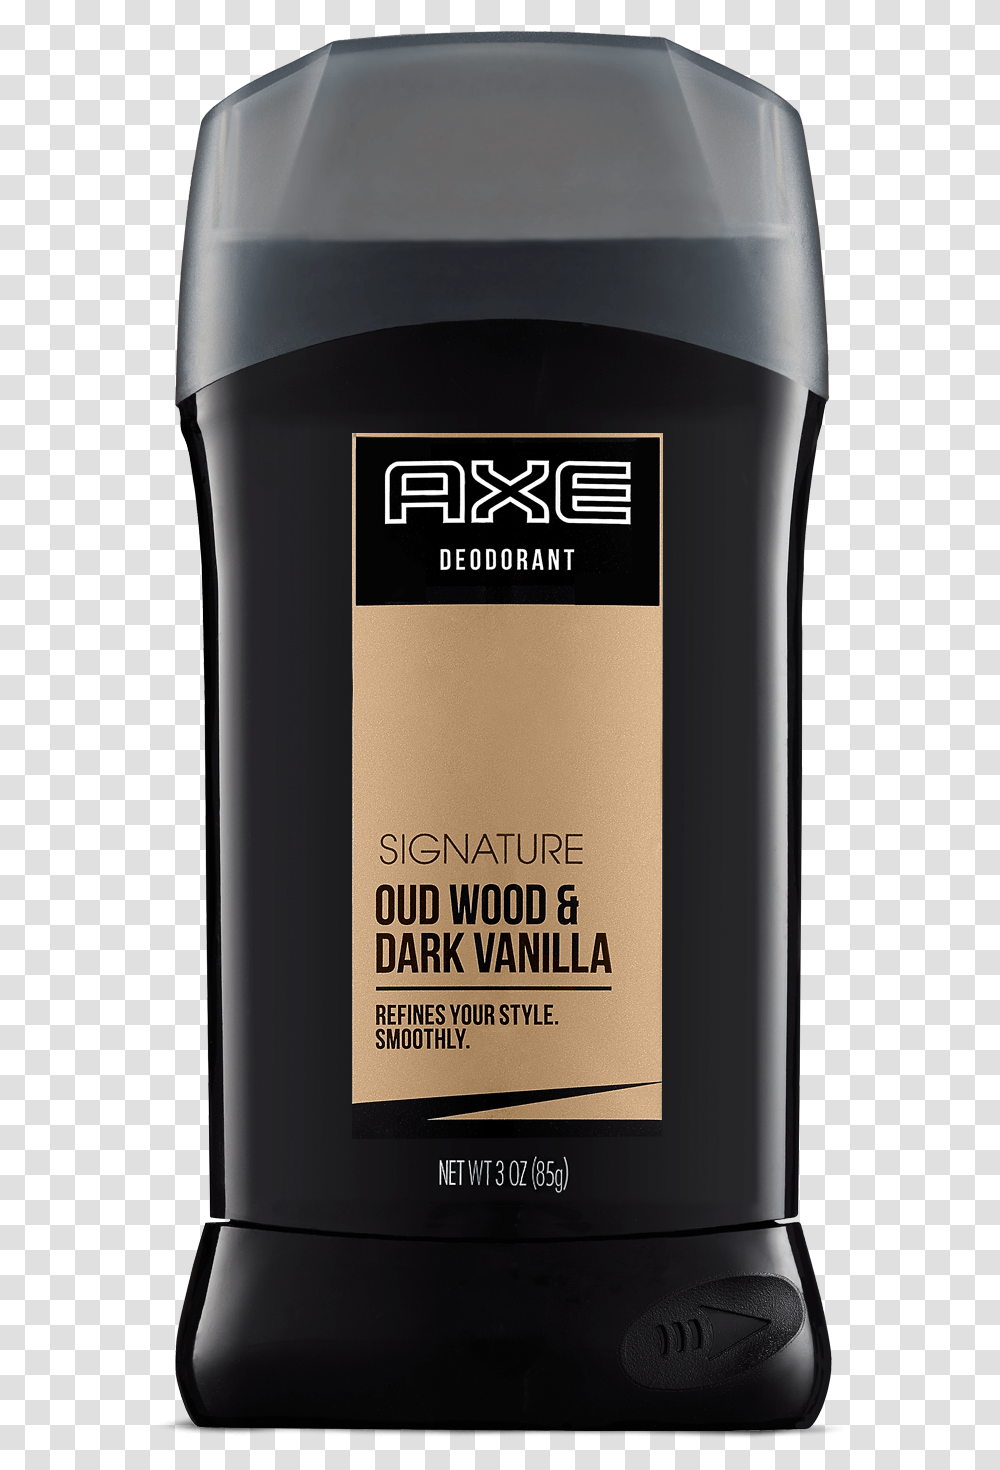 Axe Deodorant Background Image Bottle, Cosmetics, Mobile Phone, Electronics, Cell Phone Transparent Png